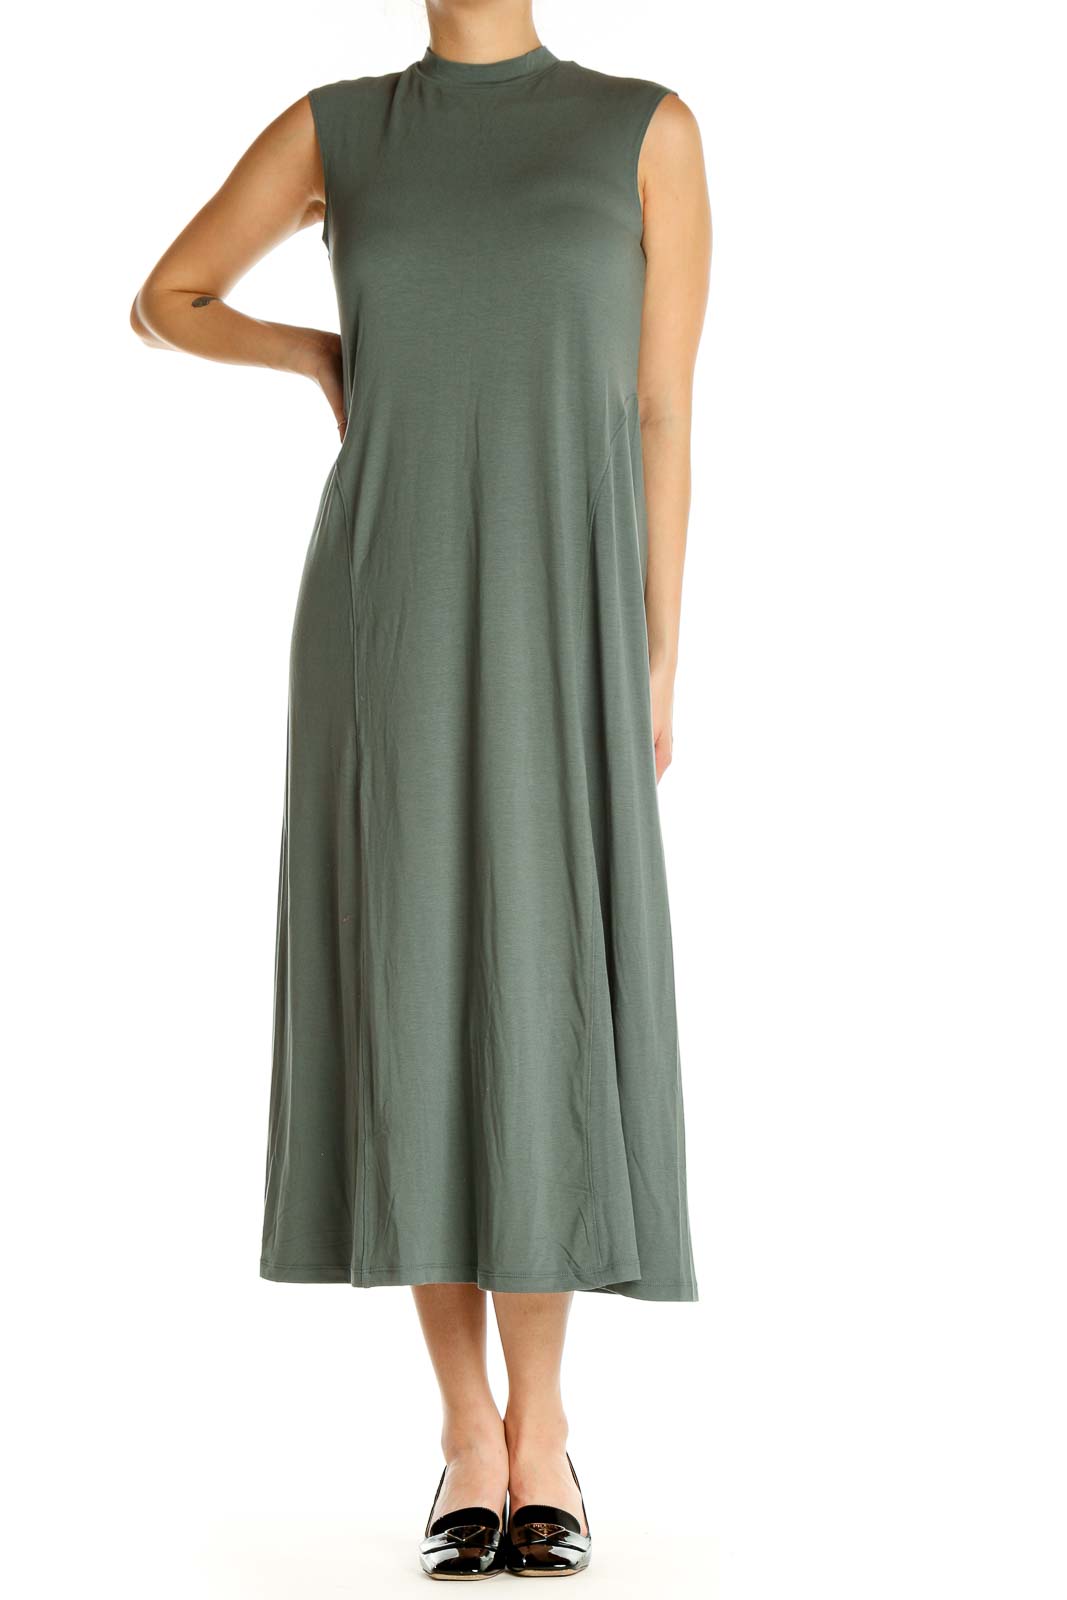 Green Solid Classic Fit & Flare Dress Front